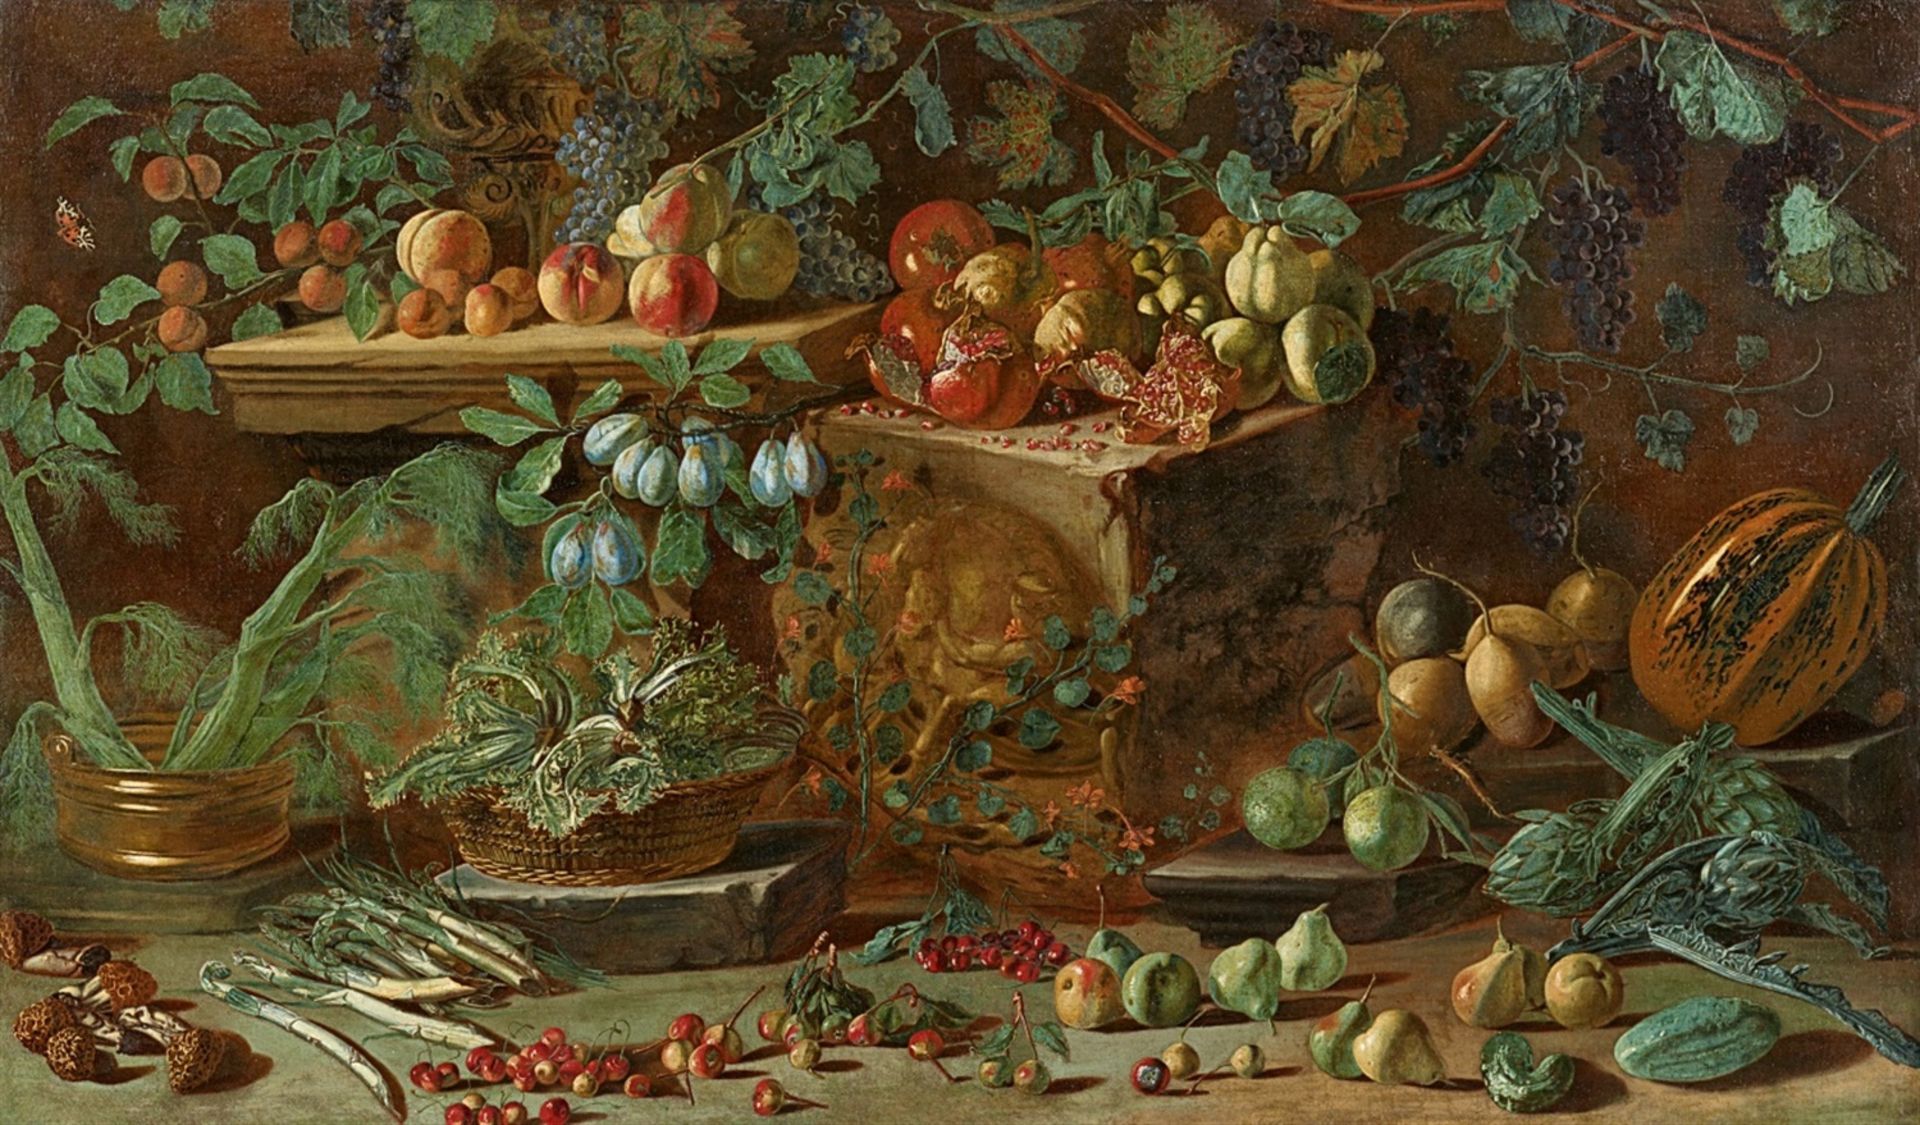 Pietro Paolo BonziLarge Still Life with Fruit and VegetablesOil on canvas (relined). 117 x 197 cm.